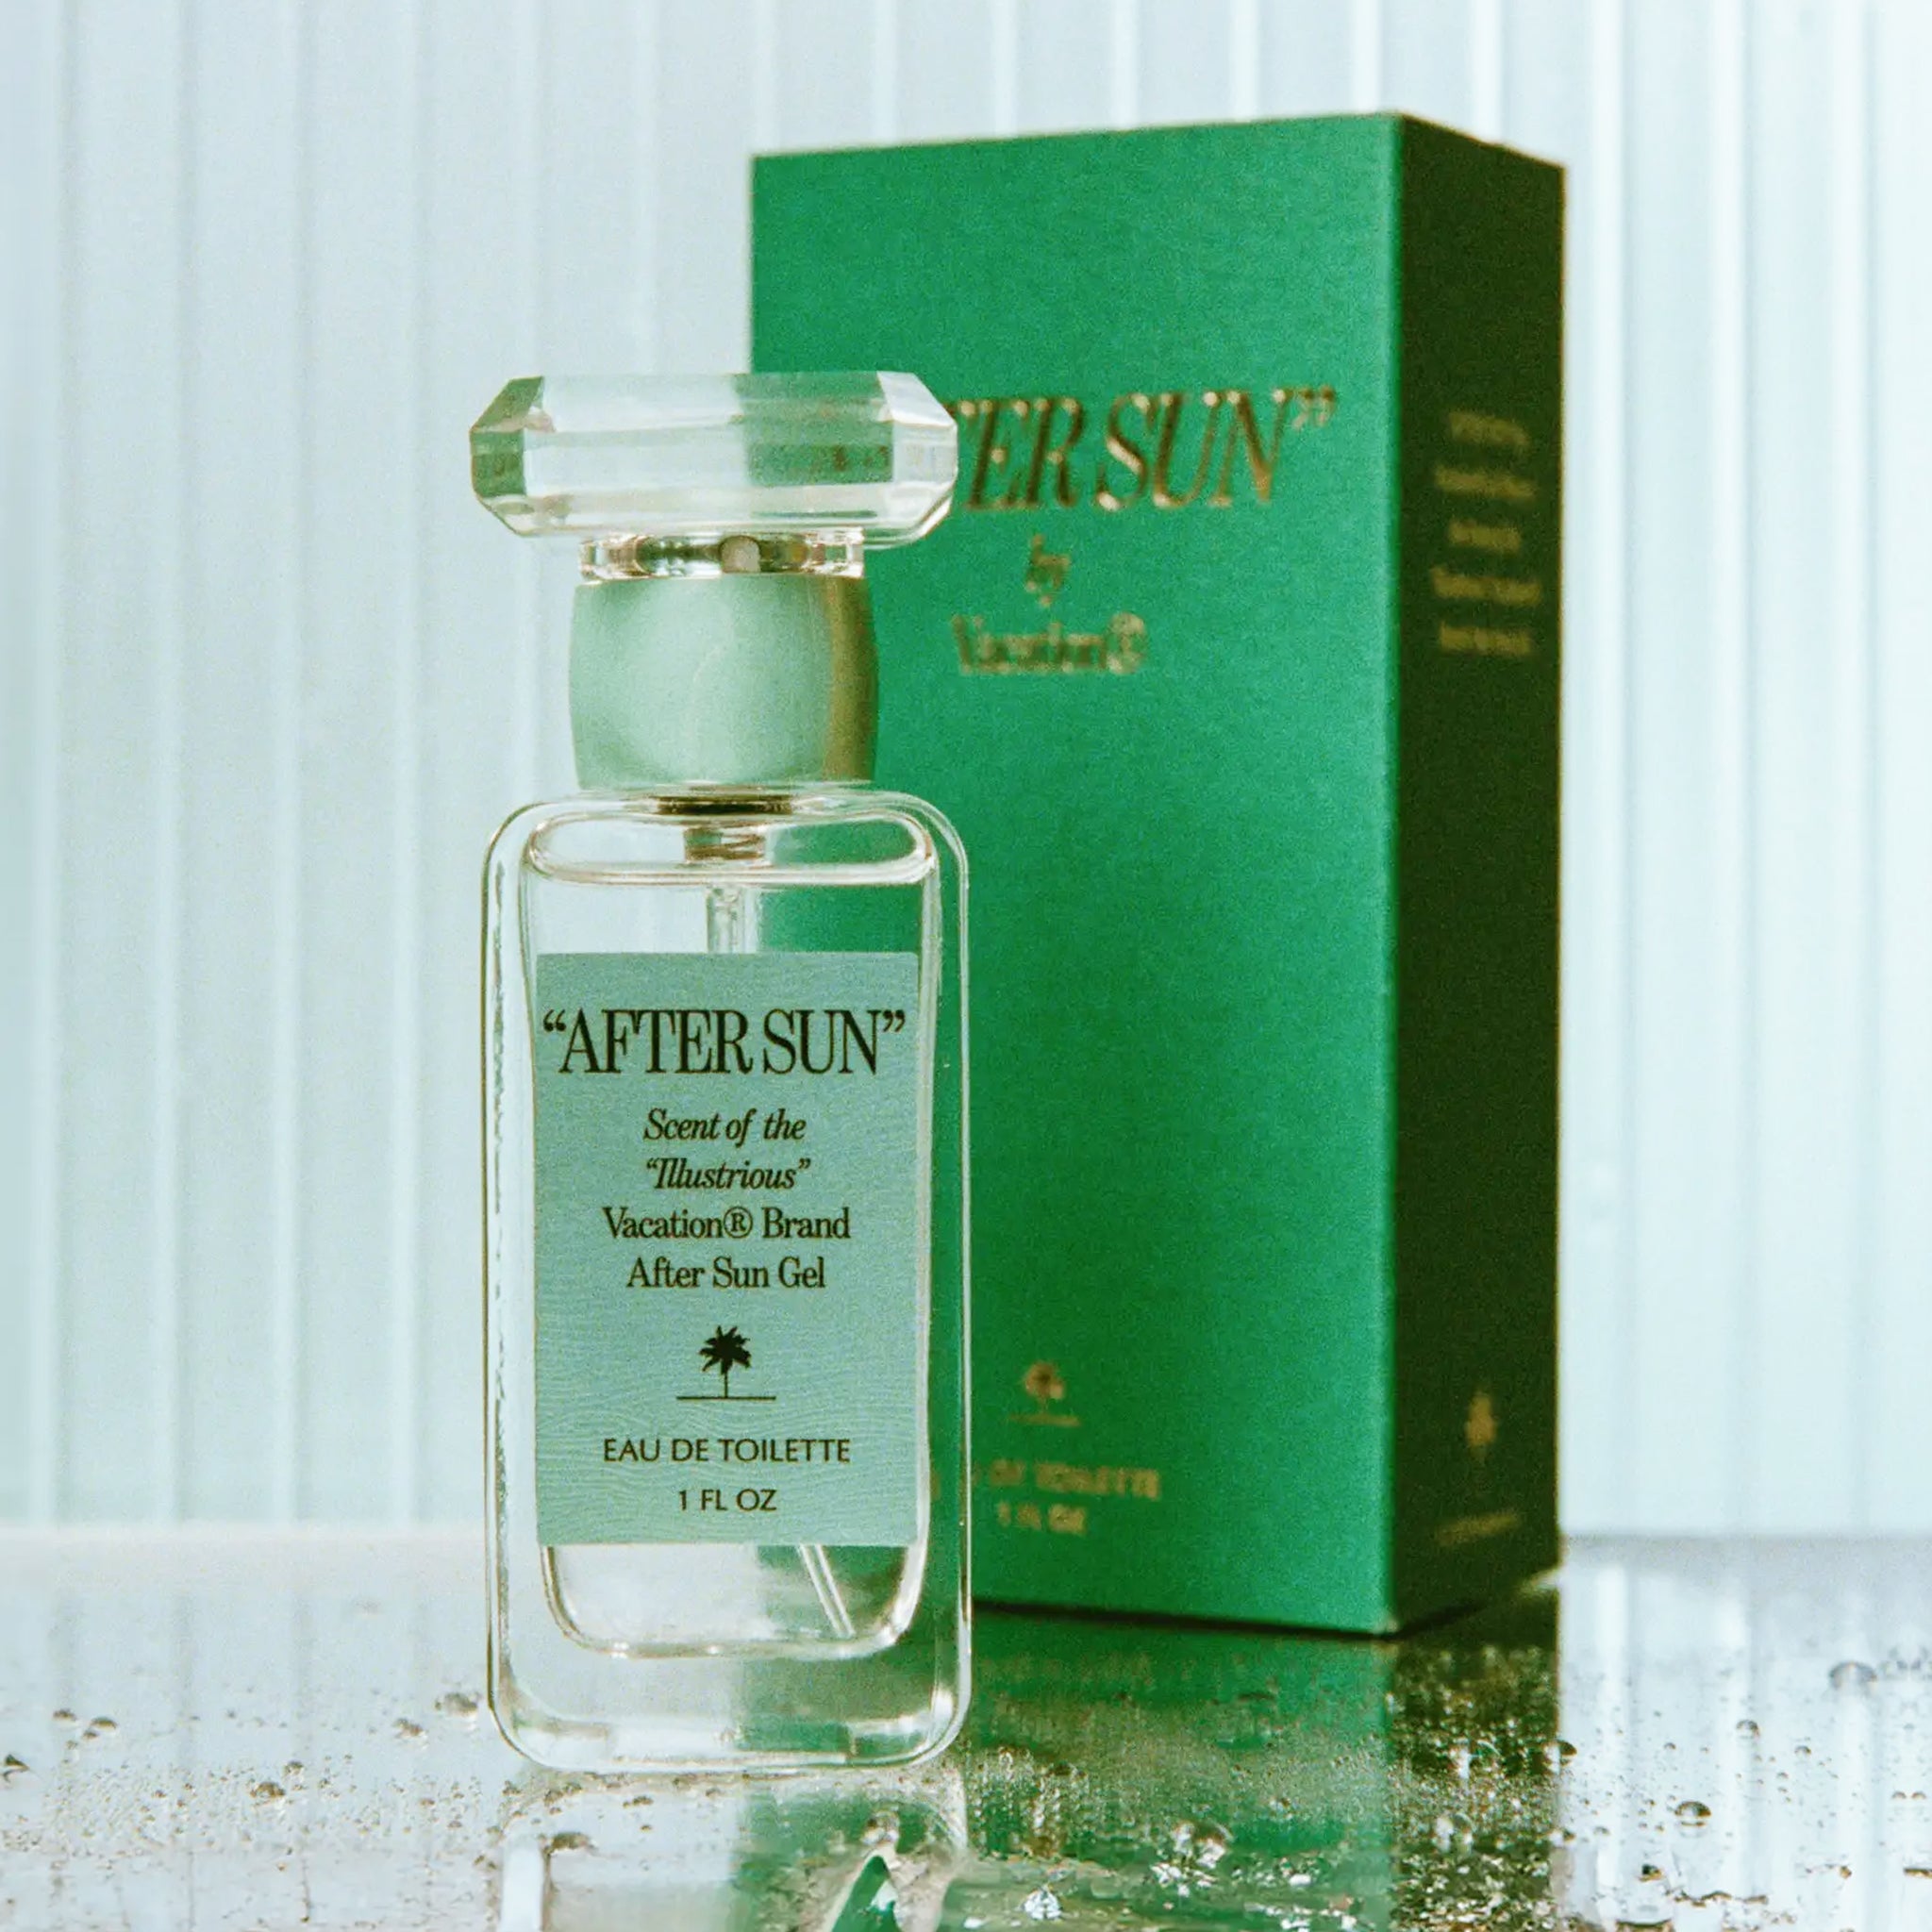 A box of perfume and a clear bottle with a teal blue label on the front that reads, "After Sun Scent of the Illustrious".